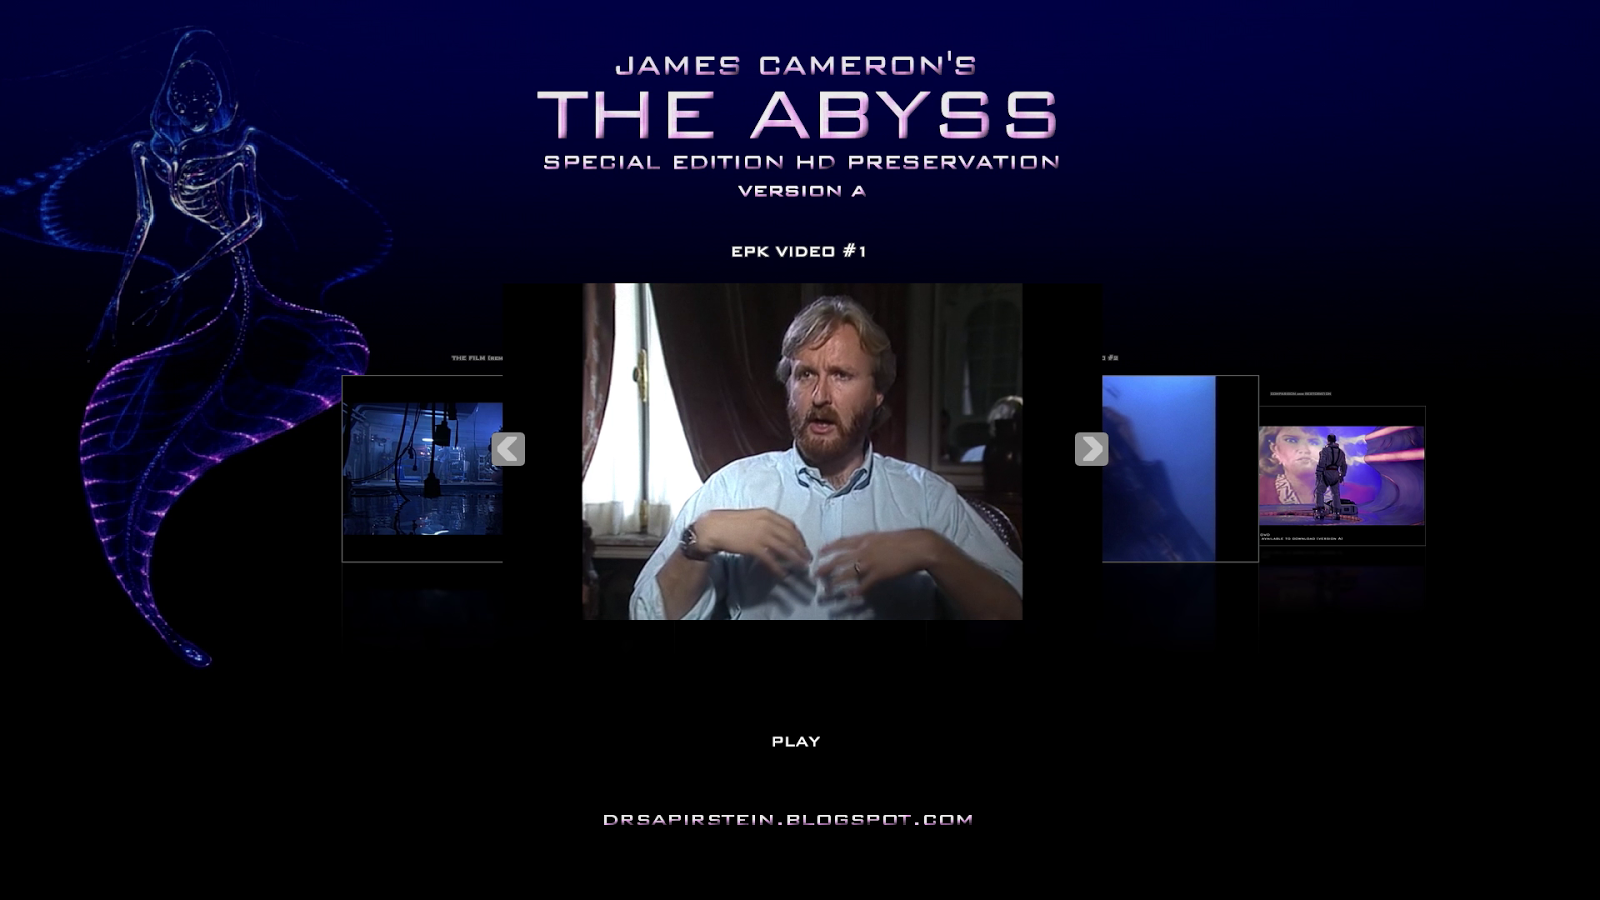 the abyss 1989 special edition 720p or 108024